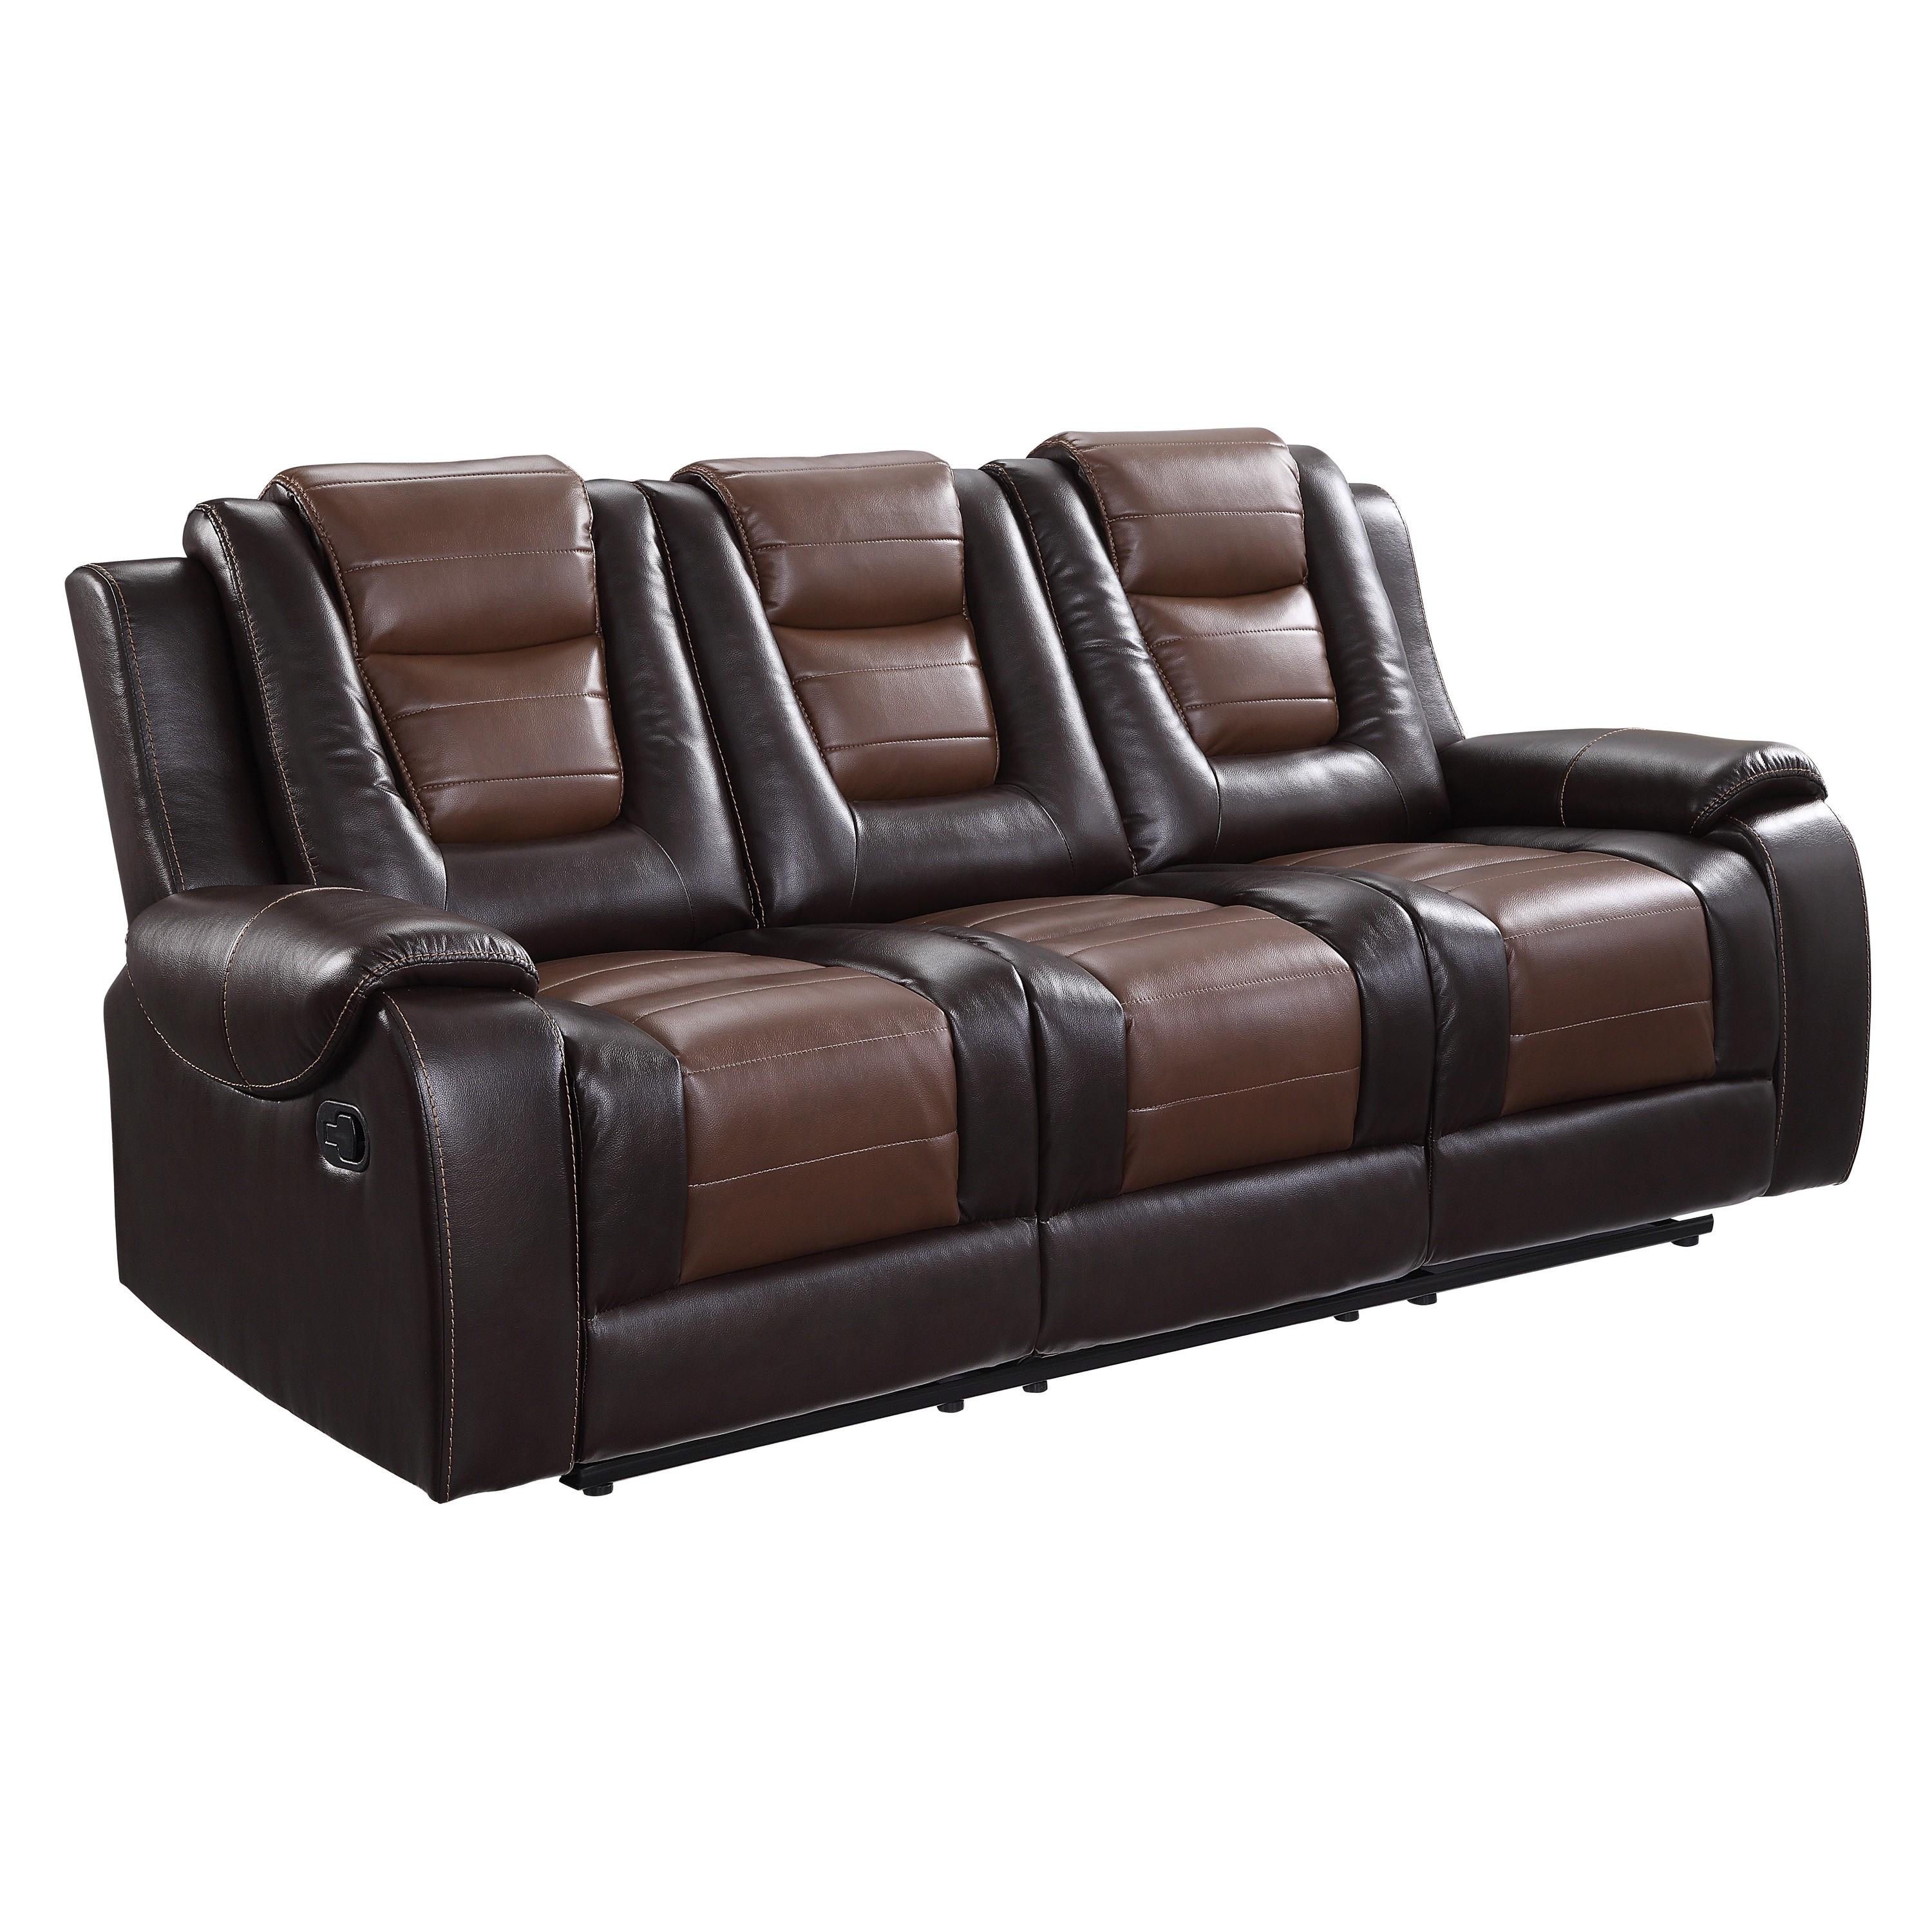 

    
Transitional Dark Brown & Light Brown Faux Leather Reclining Sofa Homelegance 9470BR-3 Briscoe
